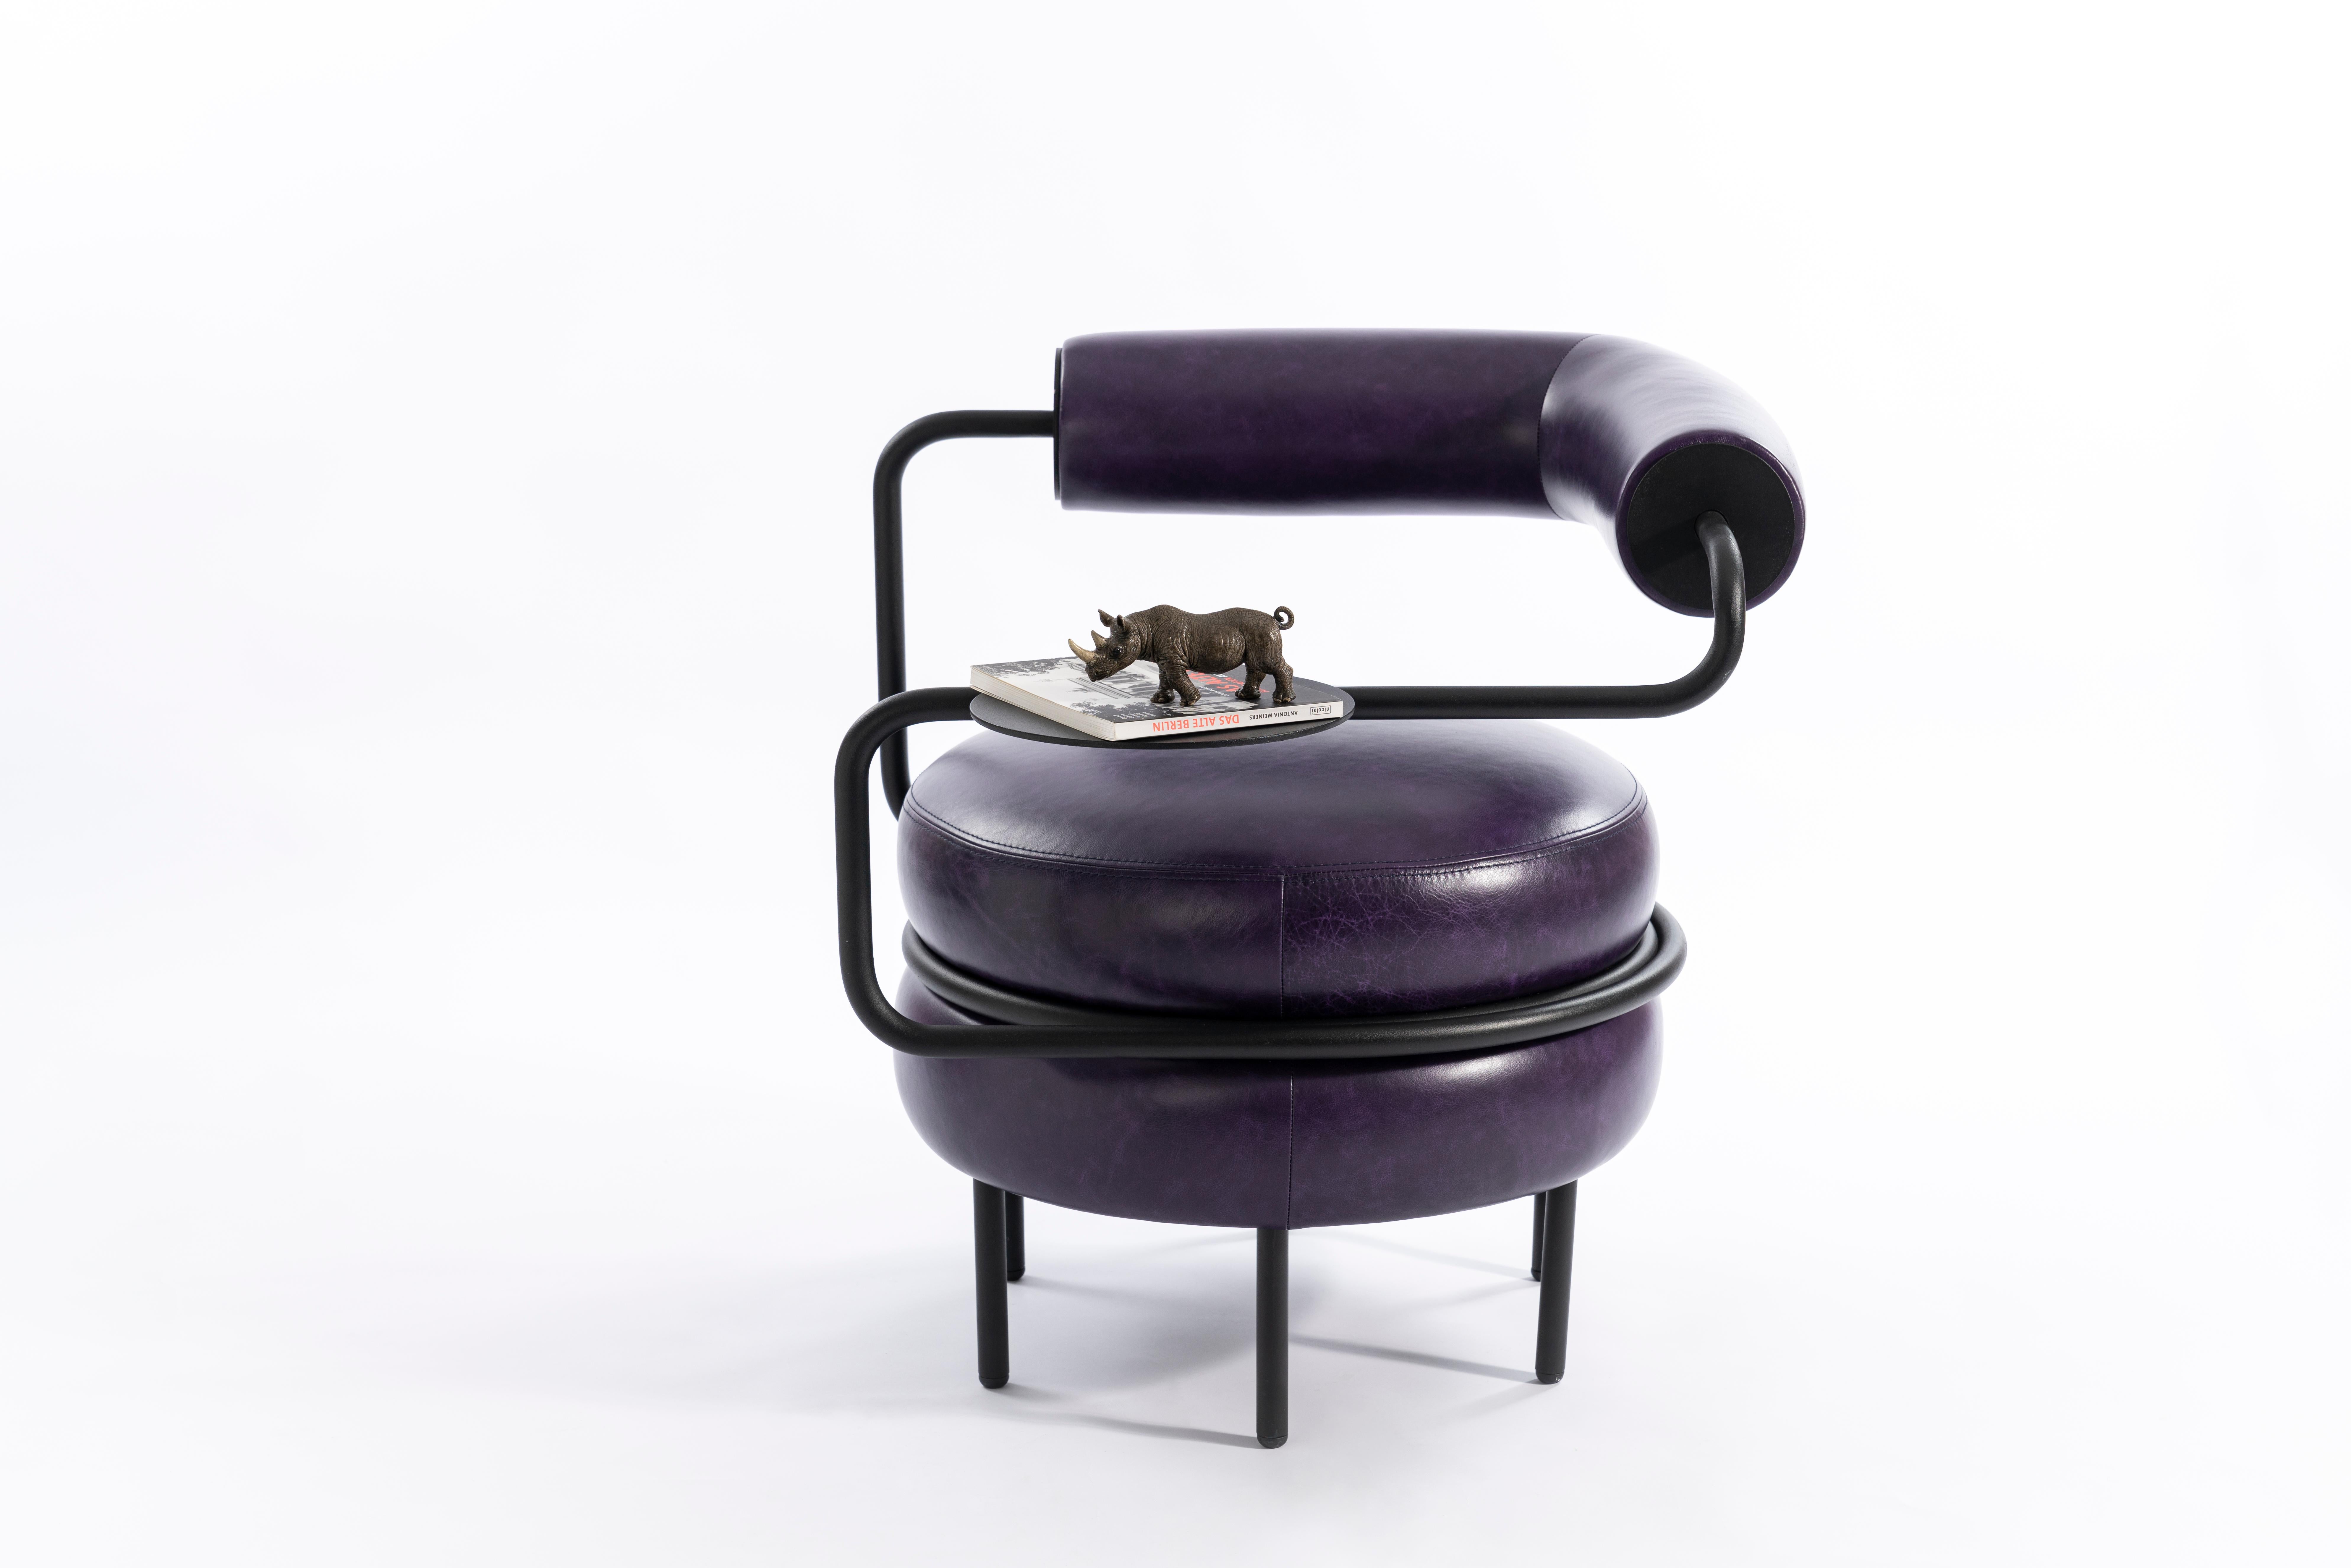 Kontra's interpretation of Macaron. 
One armed leather chair provides comfortable seating with a side table of Its own.

Experience Style and Comfort with the Macaron One-Armed Mid-Century Modern Leather Chair
Elevate your living space with the